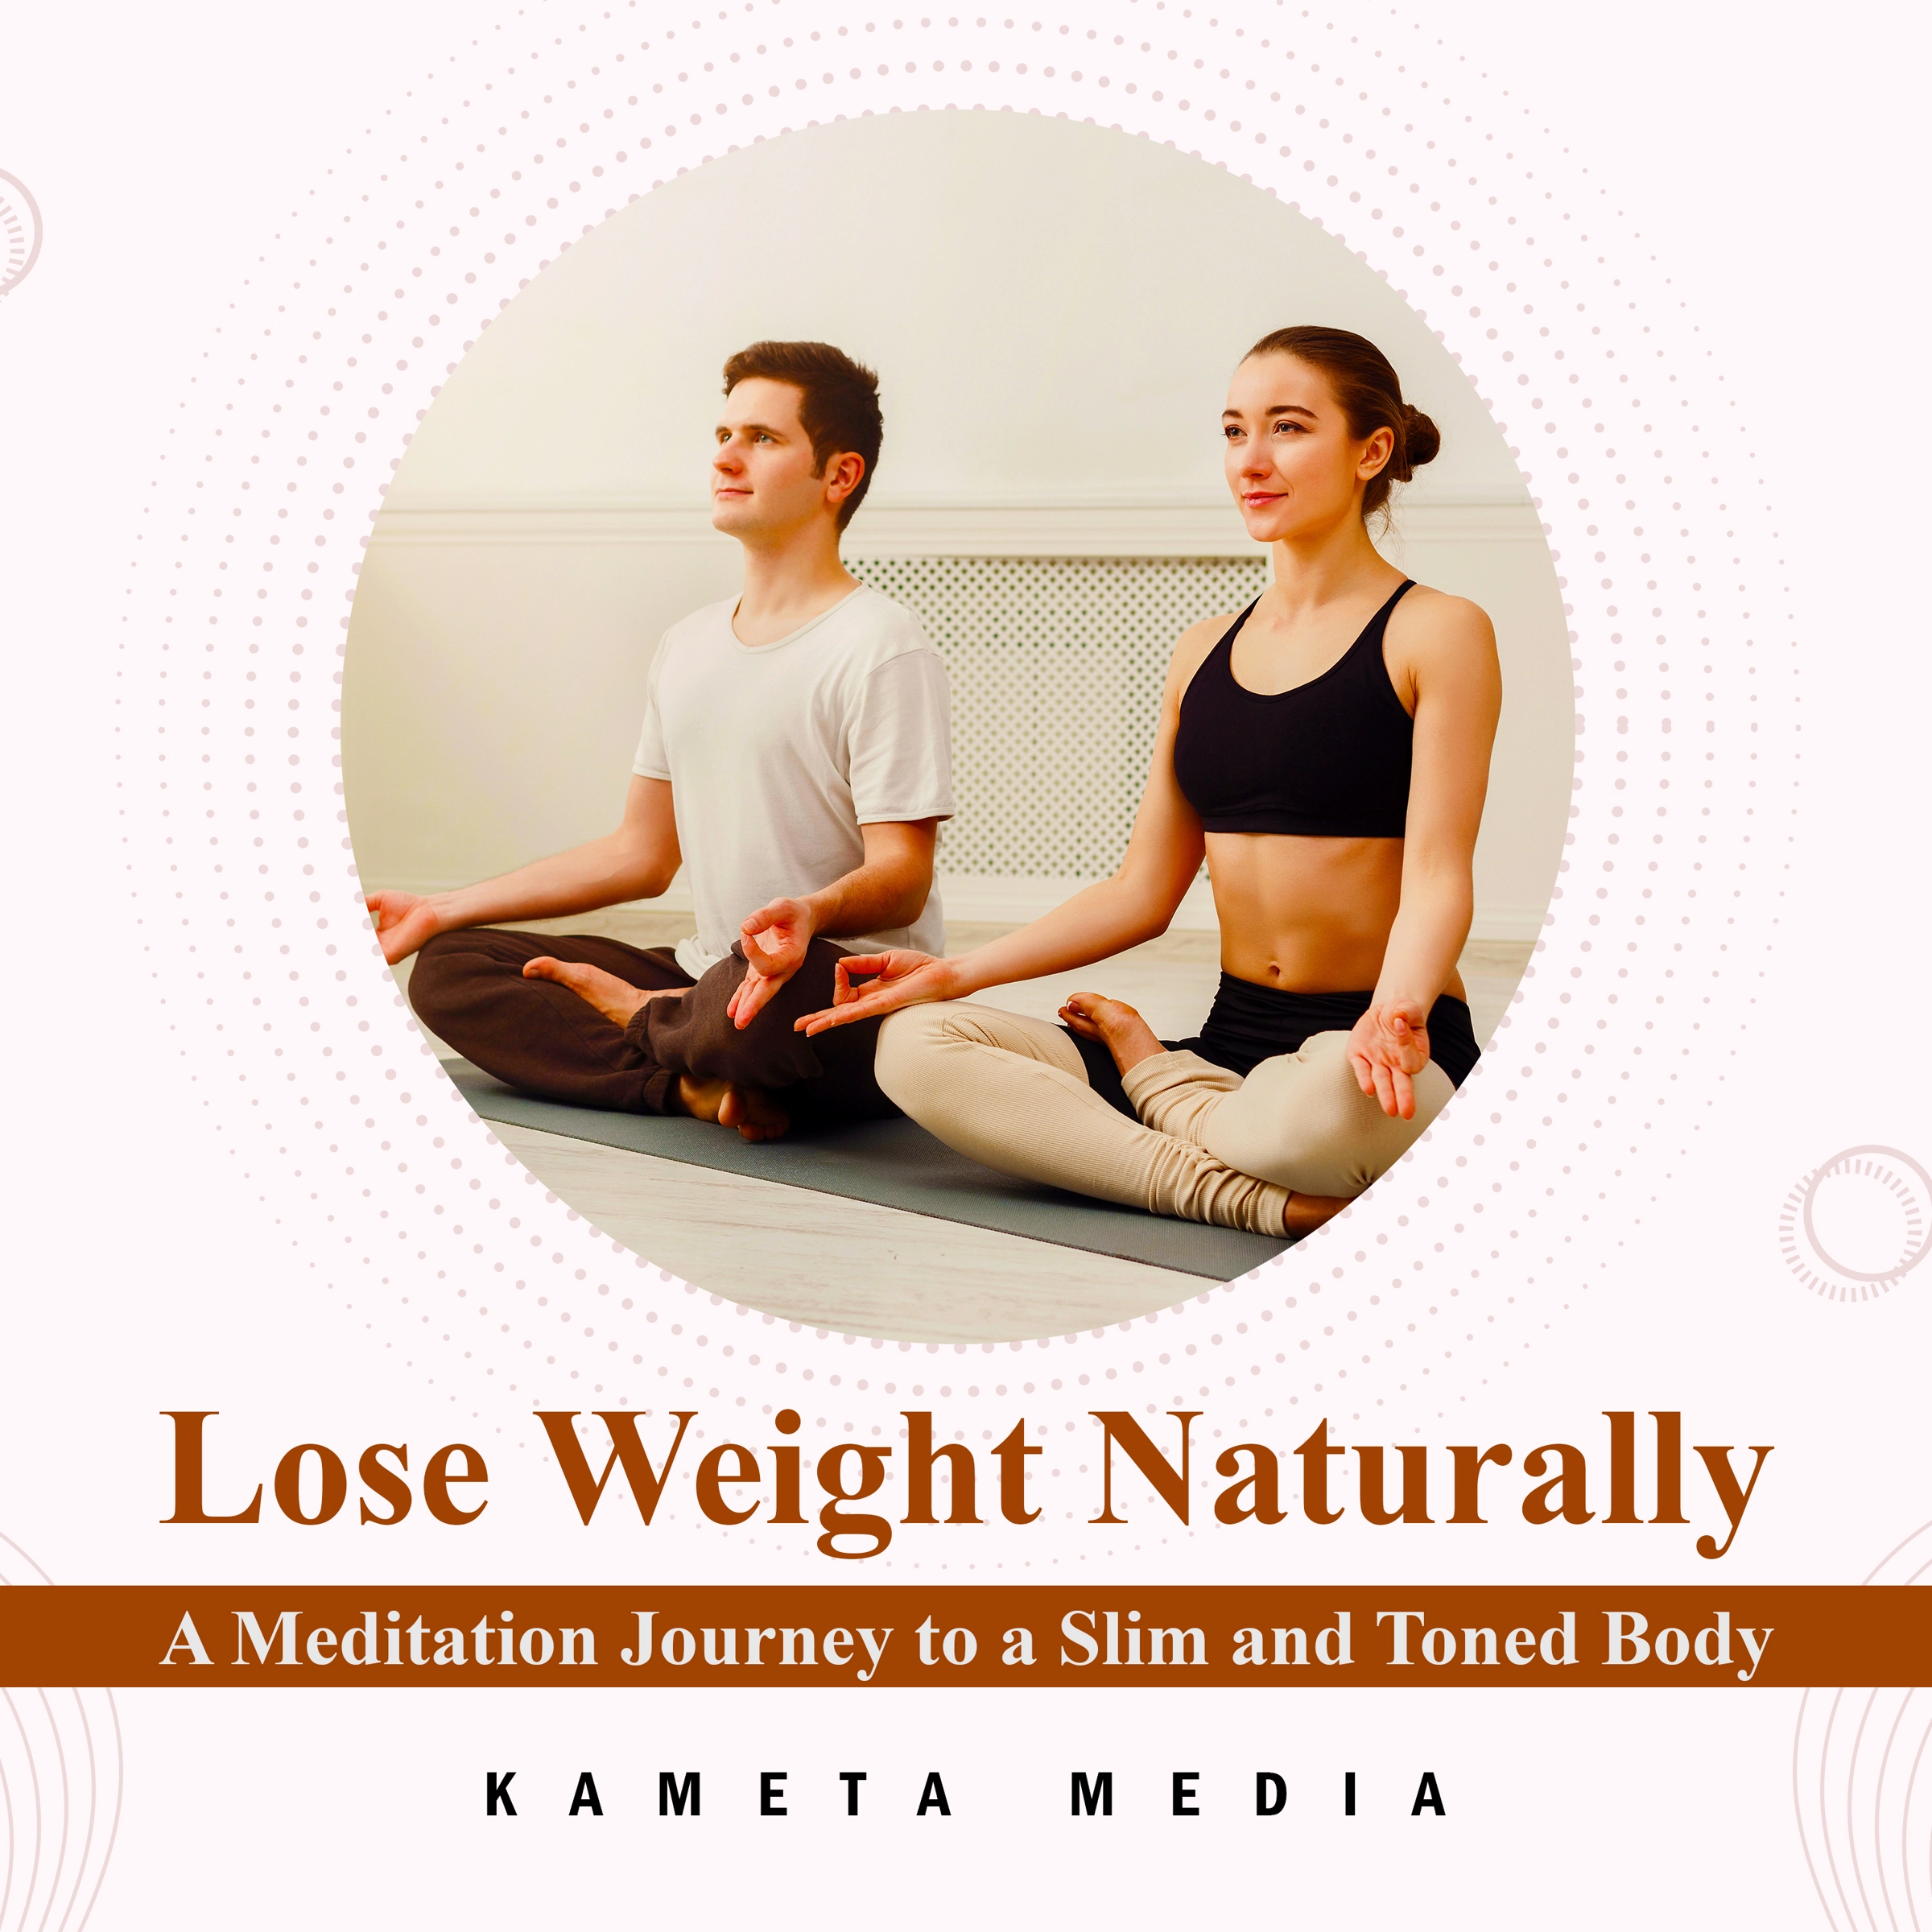 Lose Weight Naturally: A Meditation Journey to a Slim and Toned Body Audiobook by Kameta Media